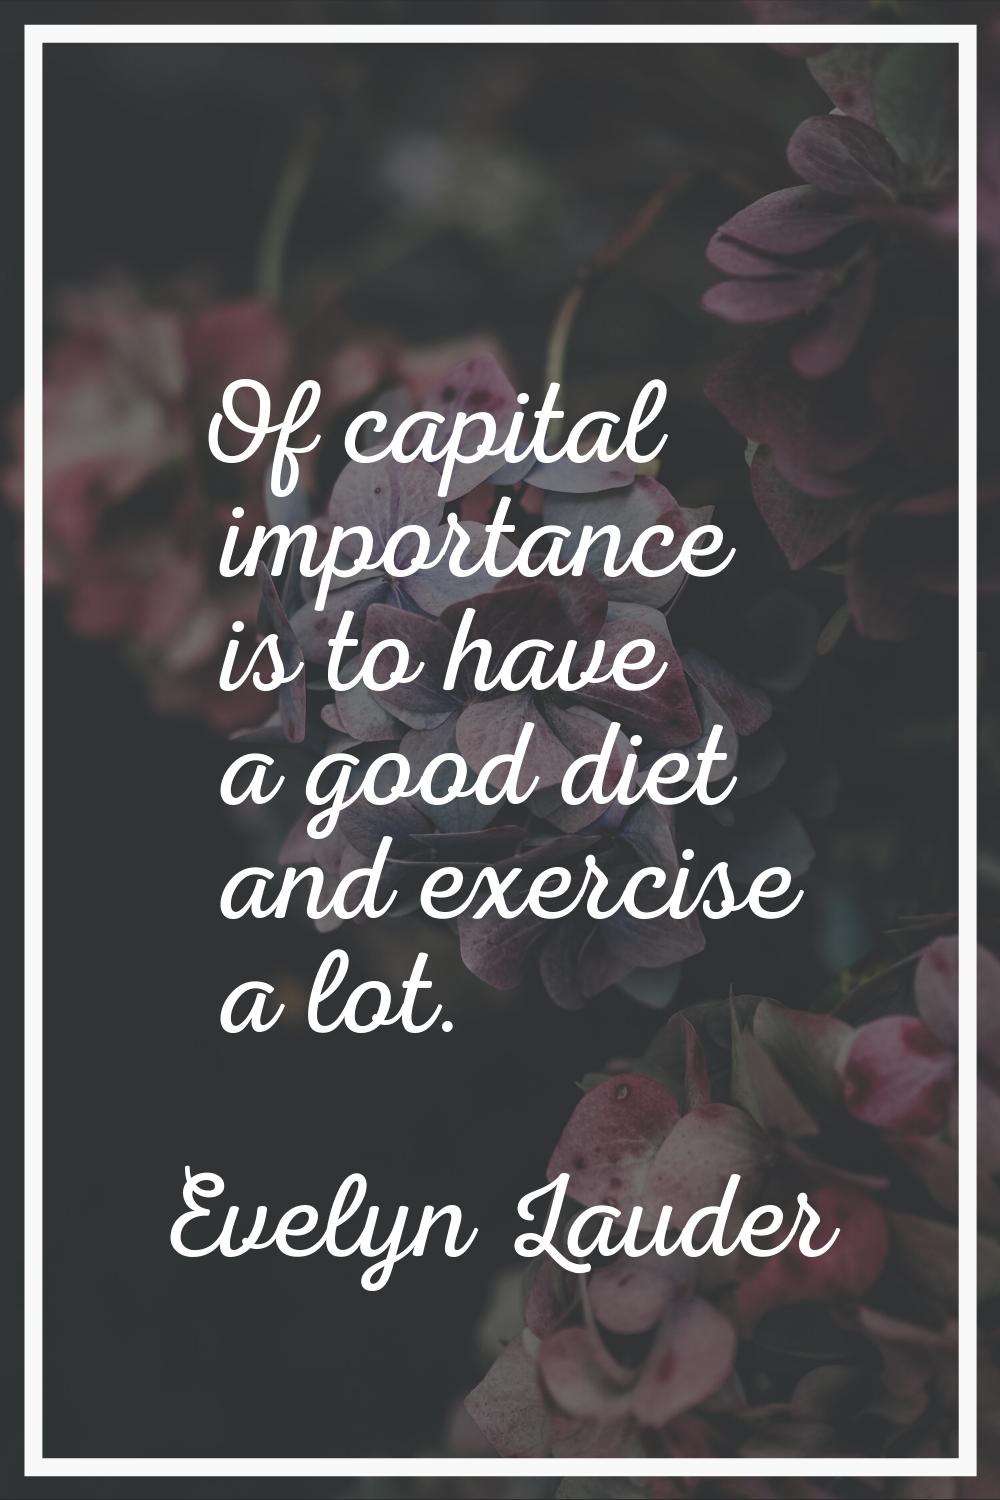 Of capital importance is to have a good diet and exercise a lot.